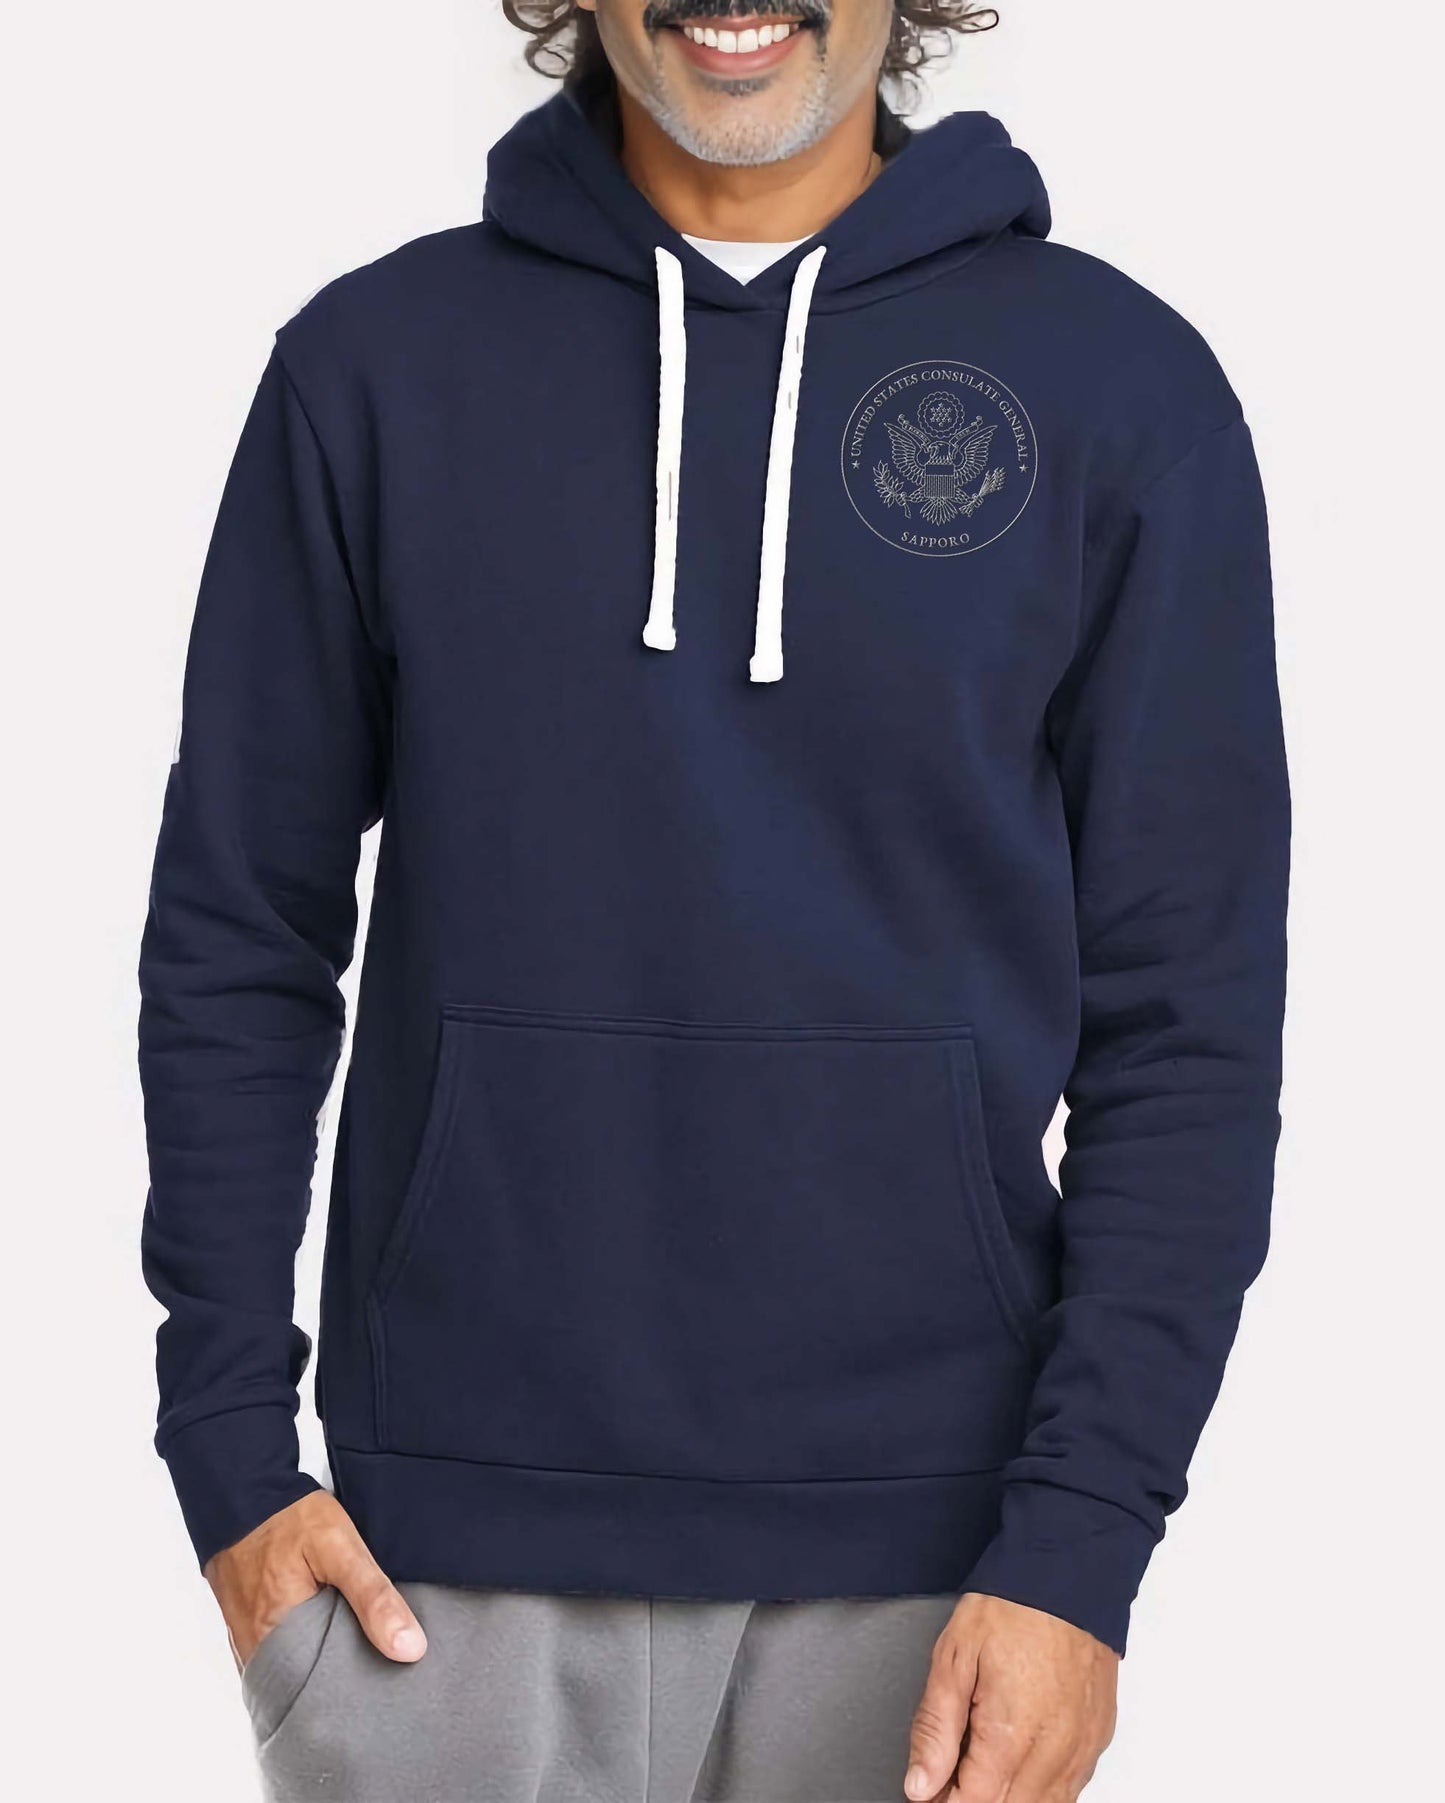 Embroidered Hoodie, Gray Seal: Sapporo